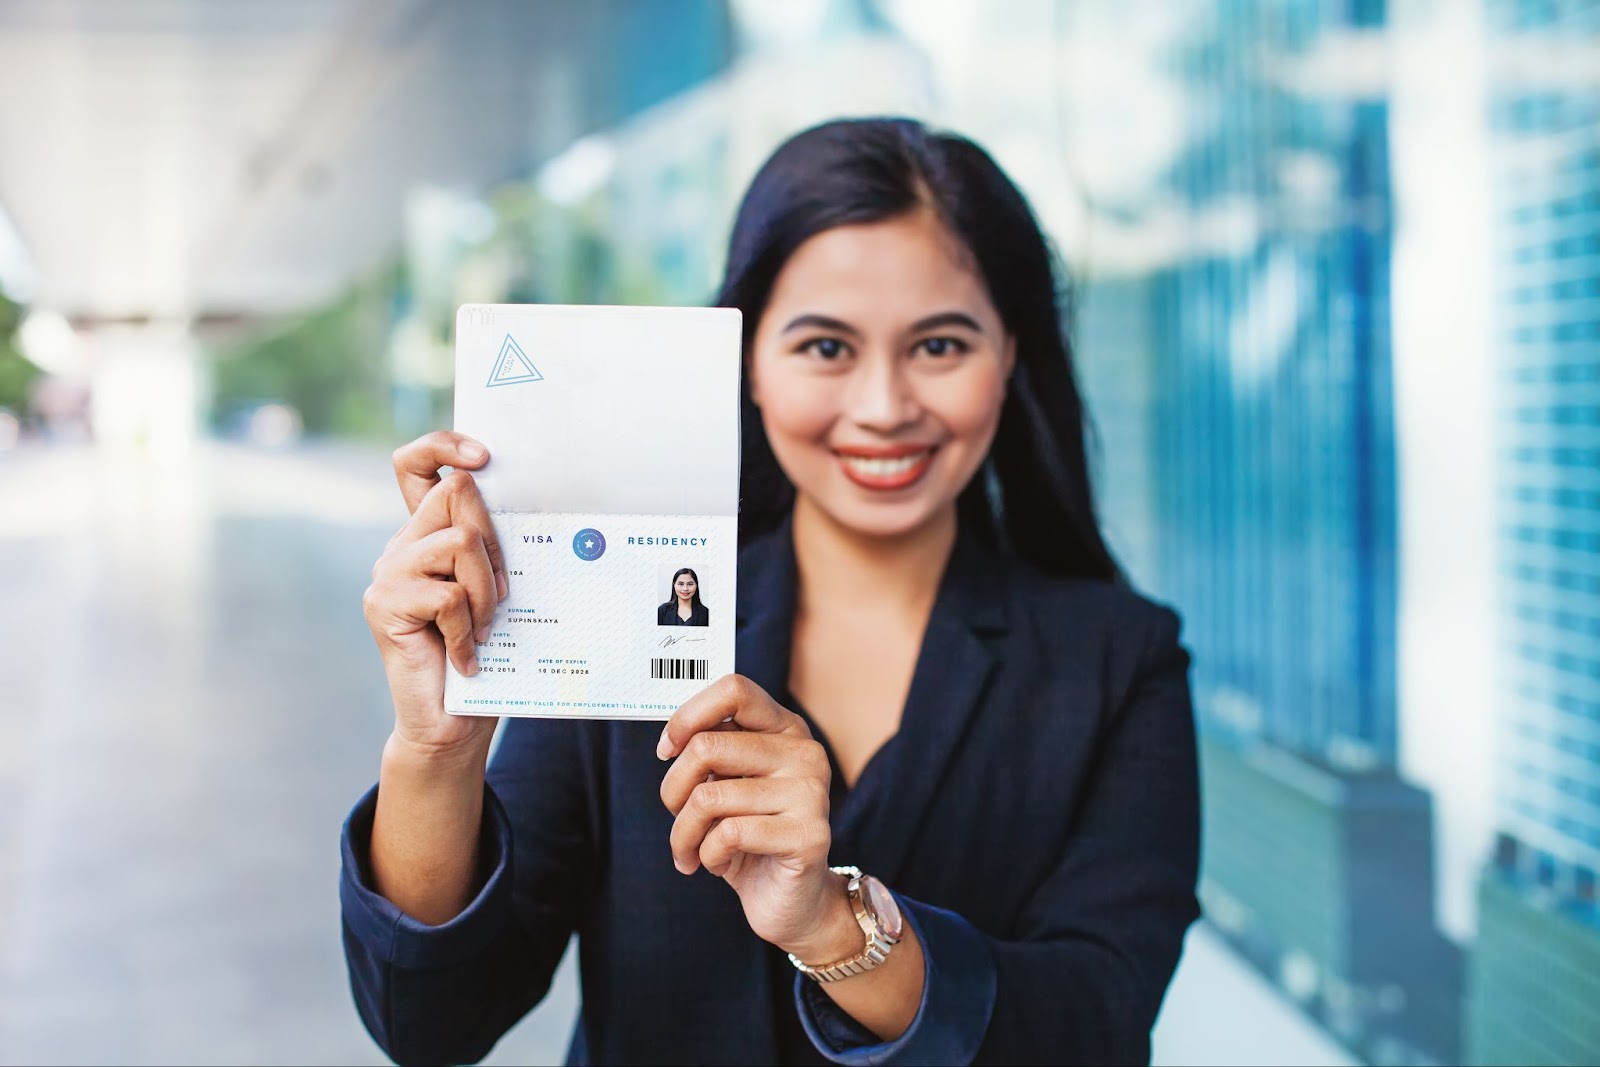 A professional woman in a business suit showcasing a card, possibly discussing visa consultation or EB-1A Visa requirements.